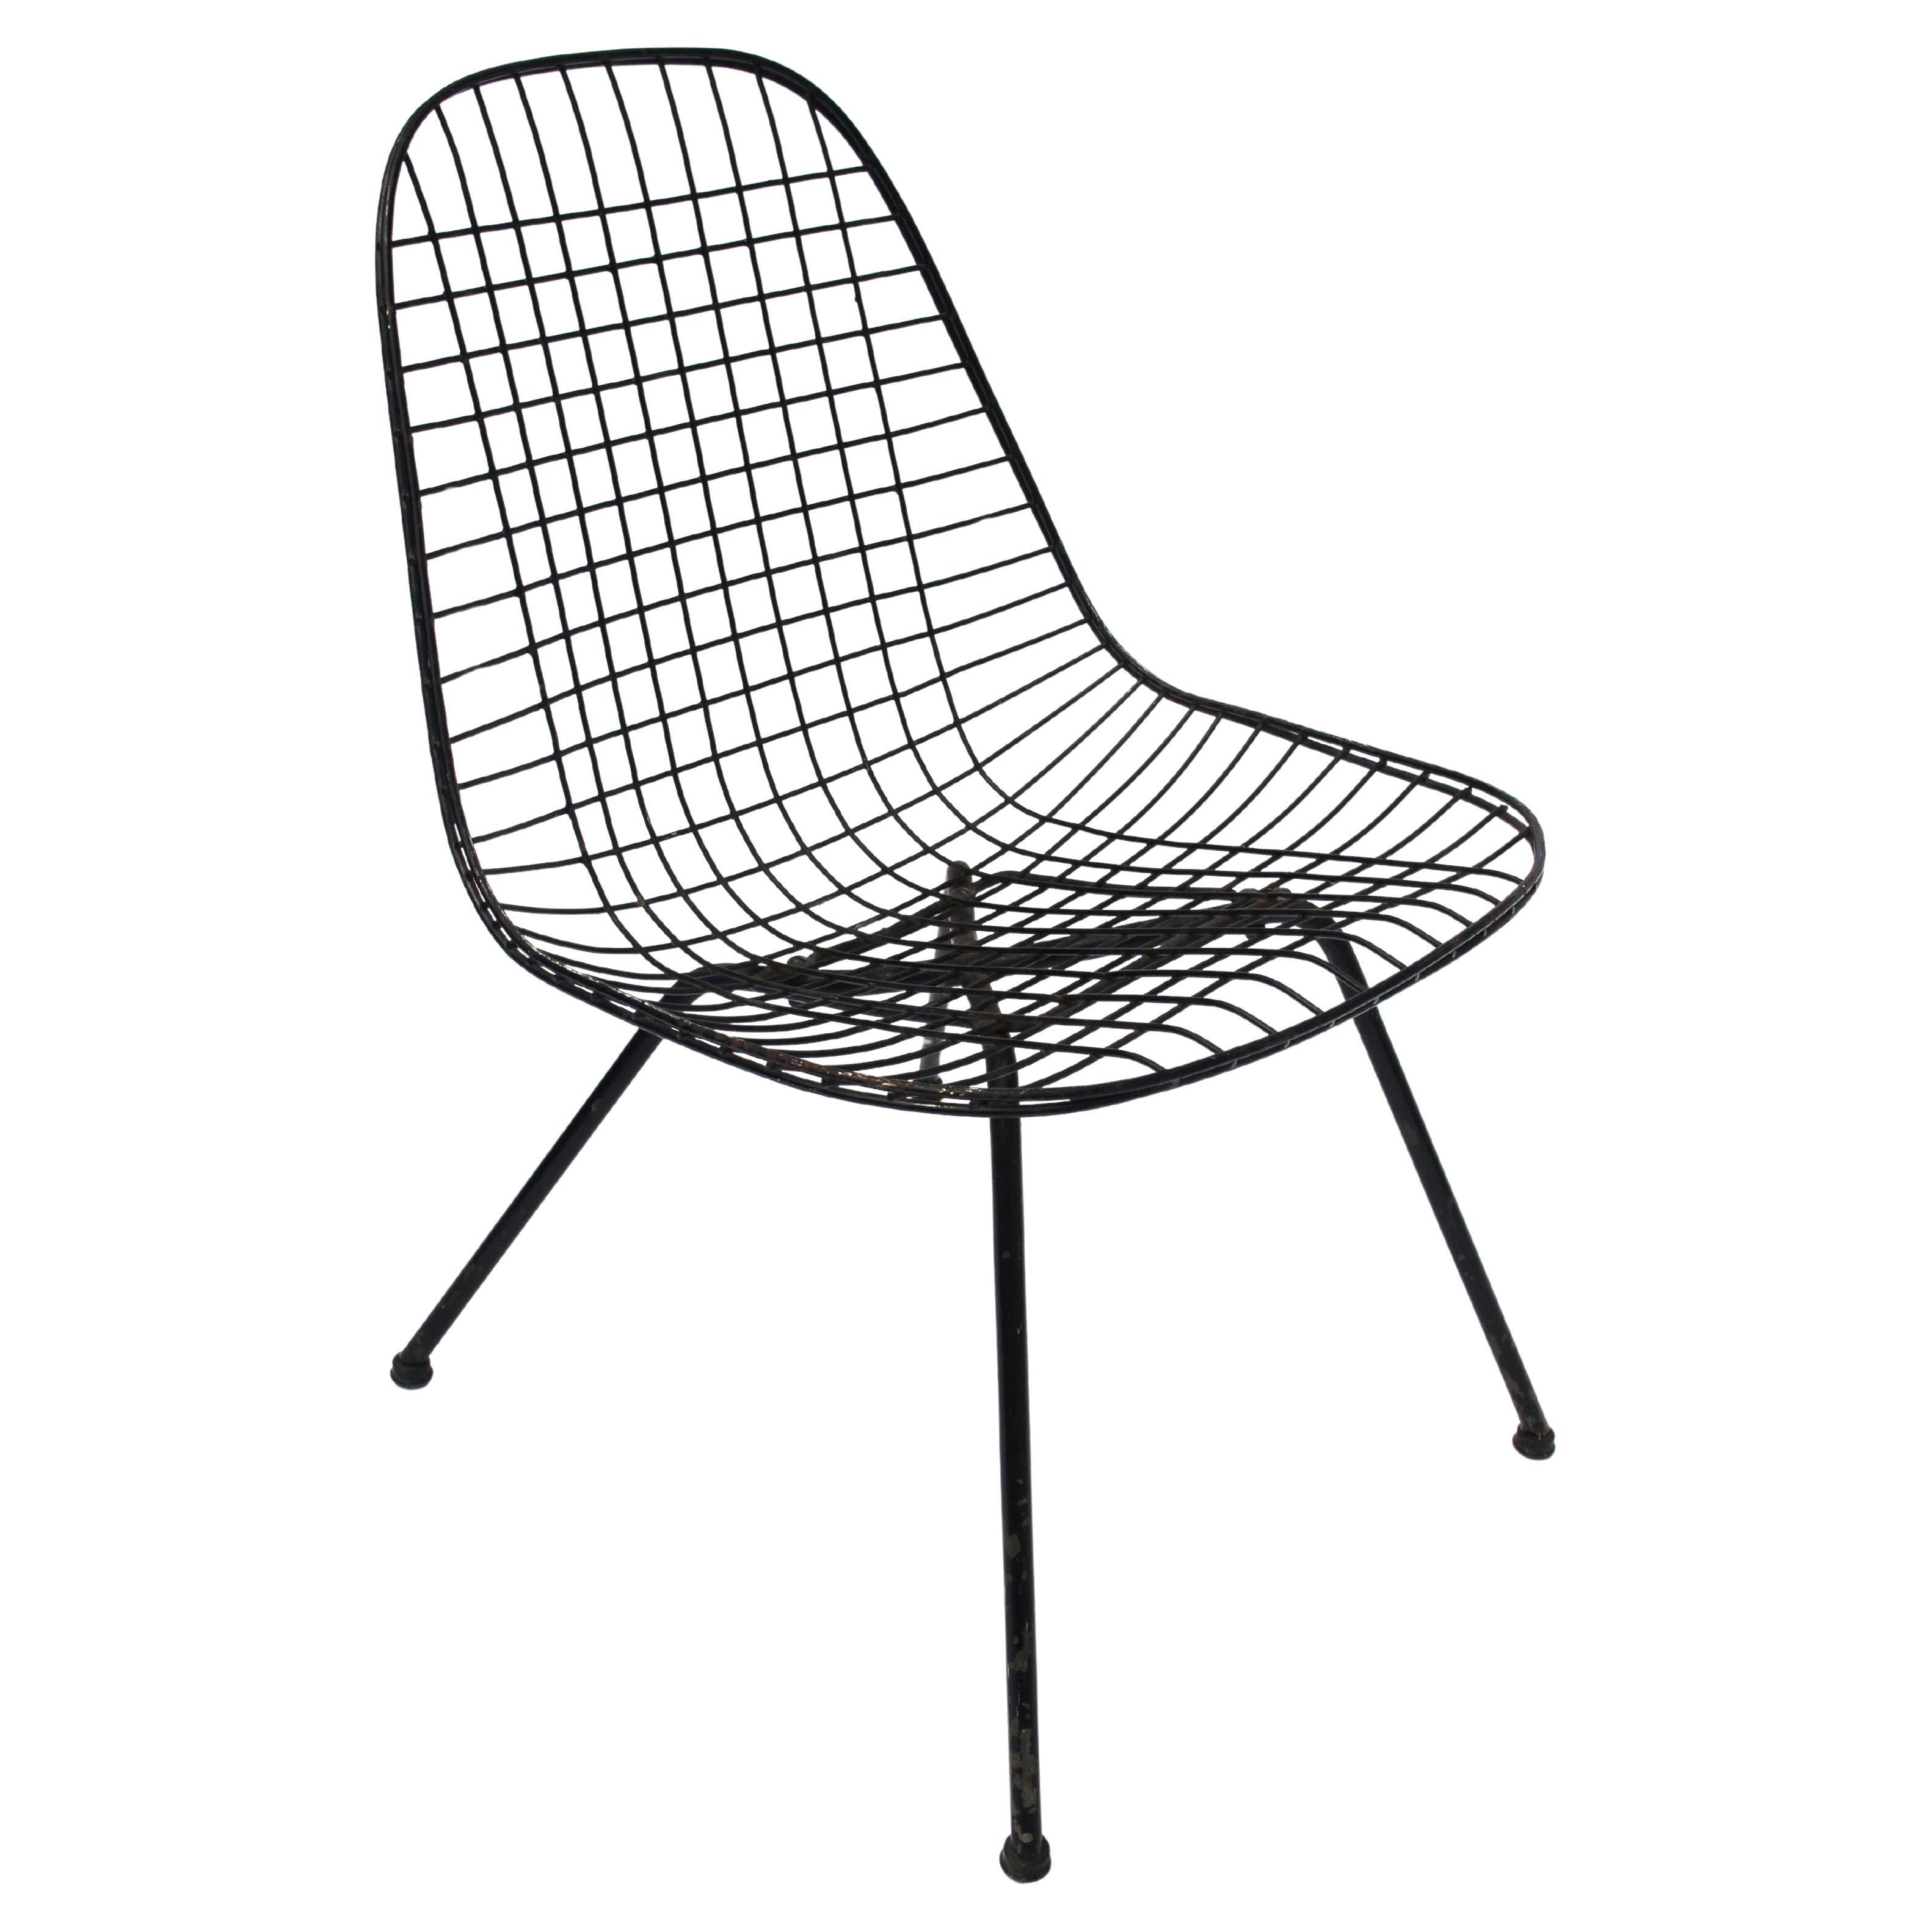 Is an Eames wire chair comfortable?